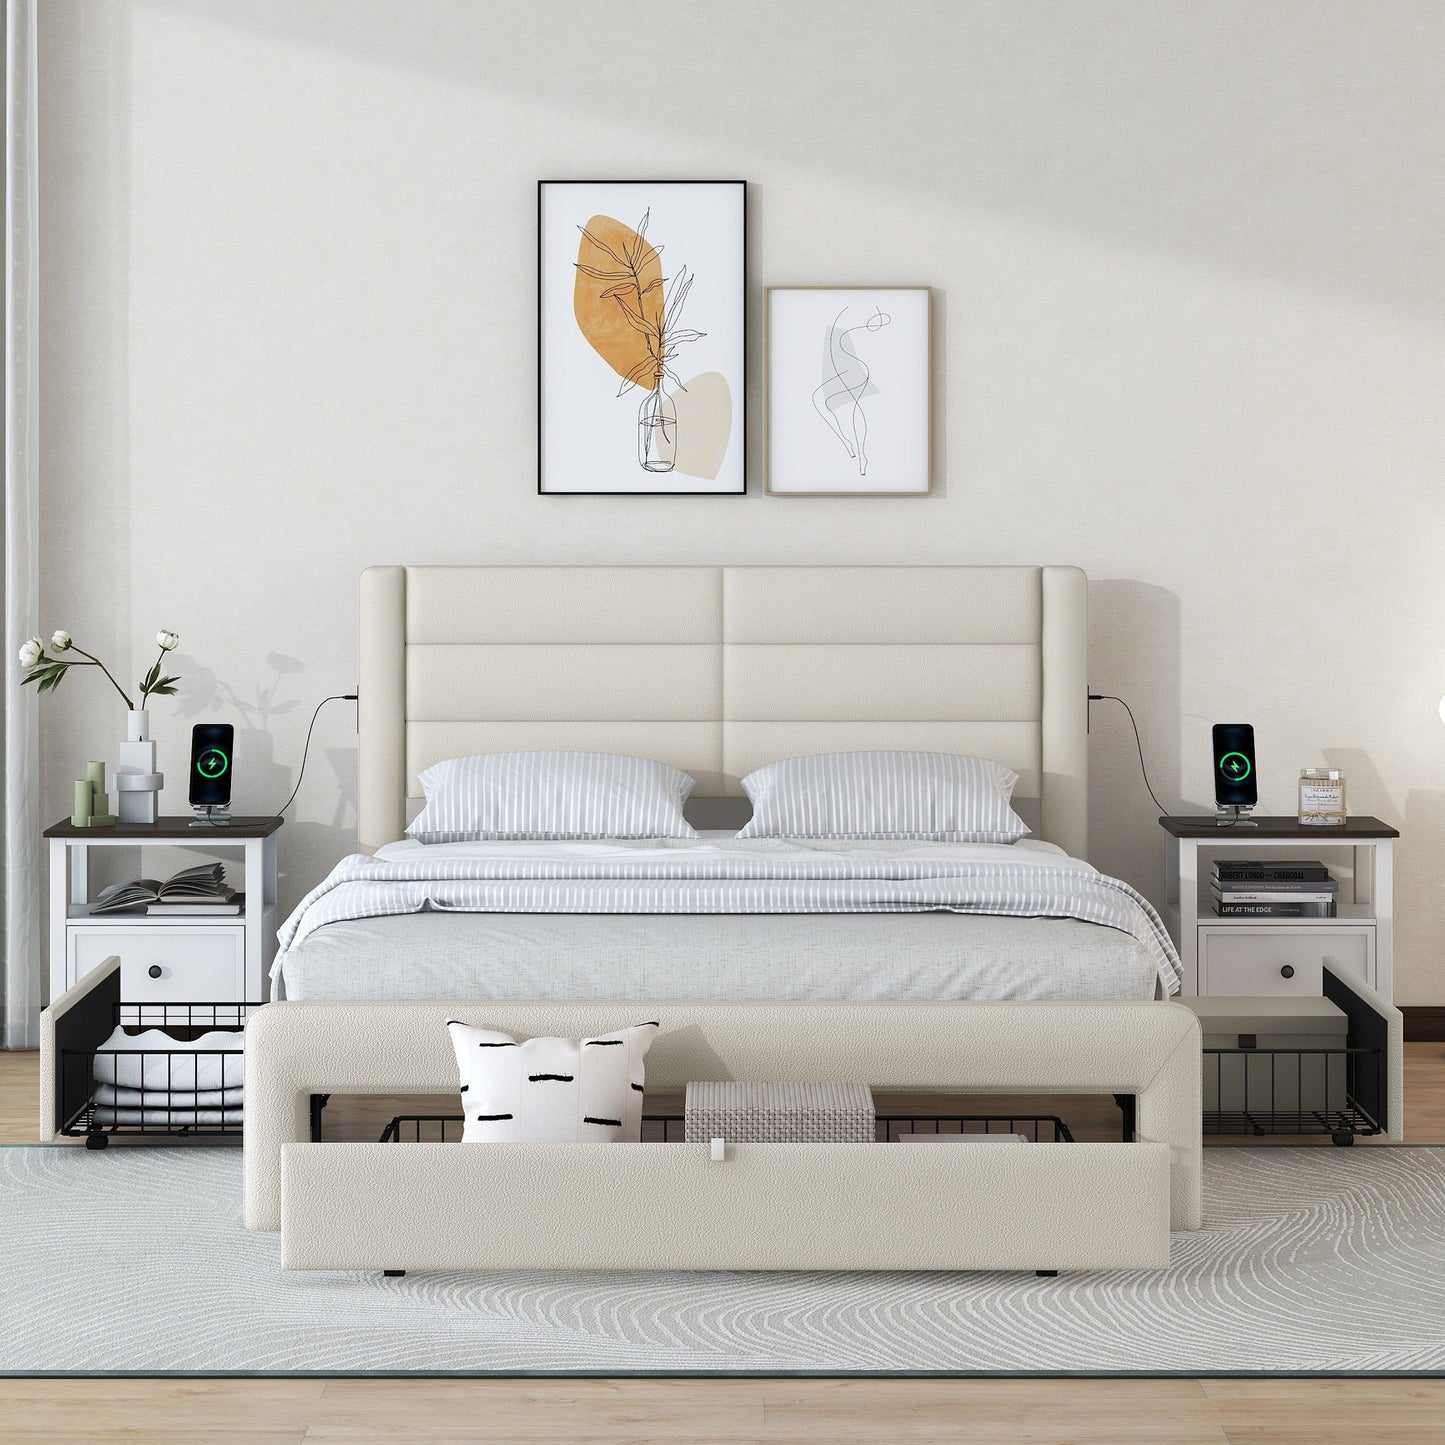 Queen Size Bed Frame with Drawers Storage, Leather Upholstered Platform Bed with Charging Station,Beige